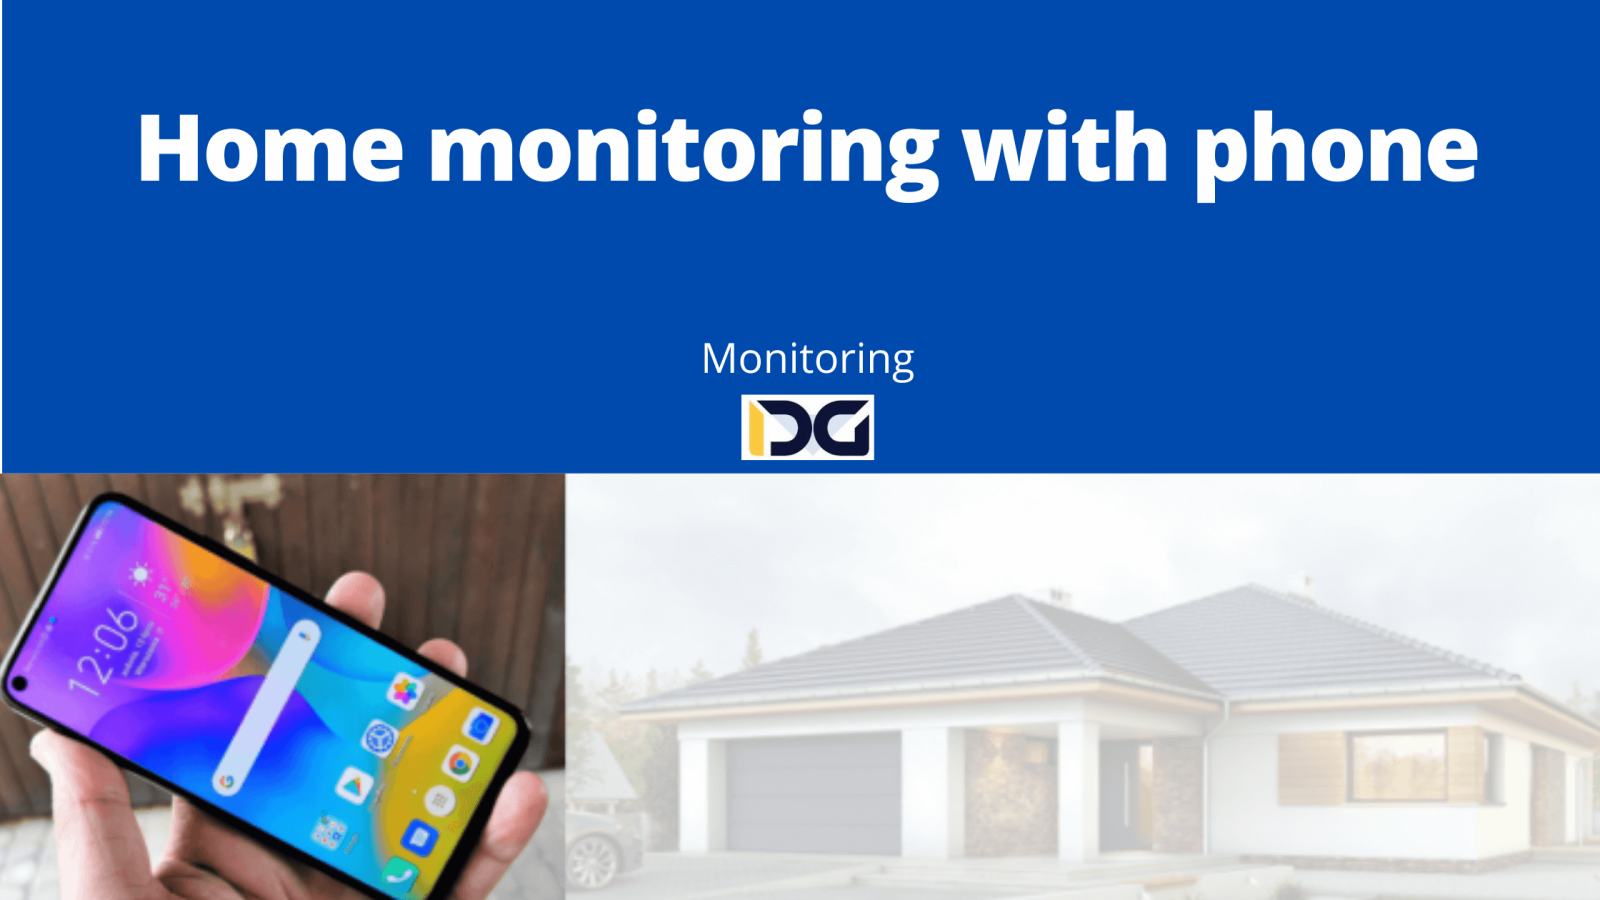 Home monitoring with phone